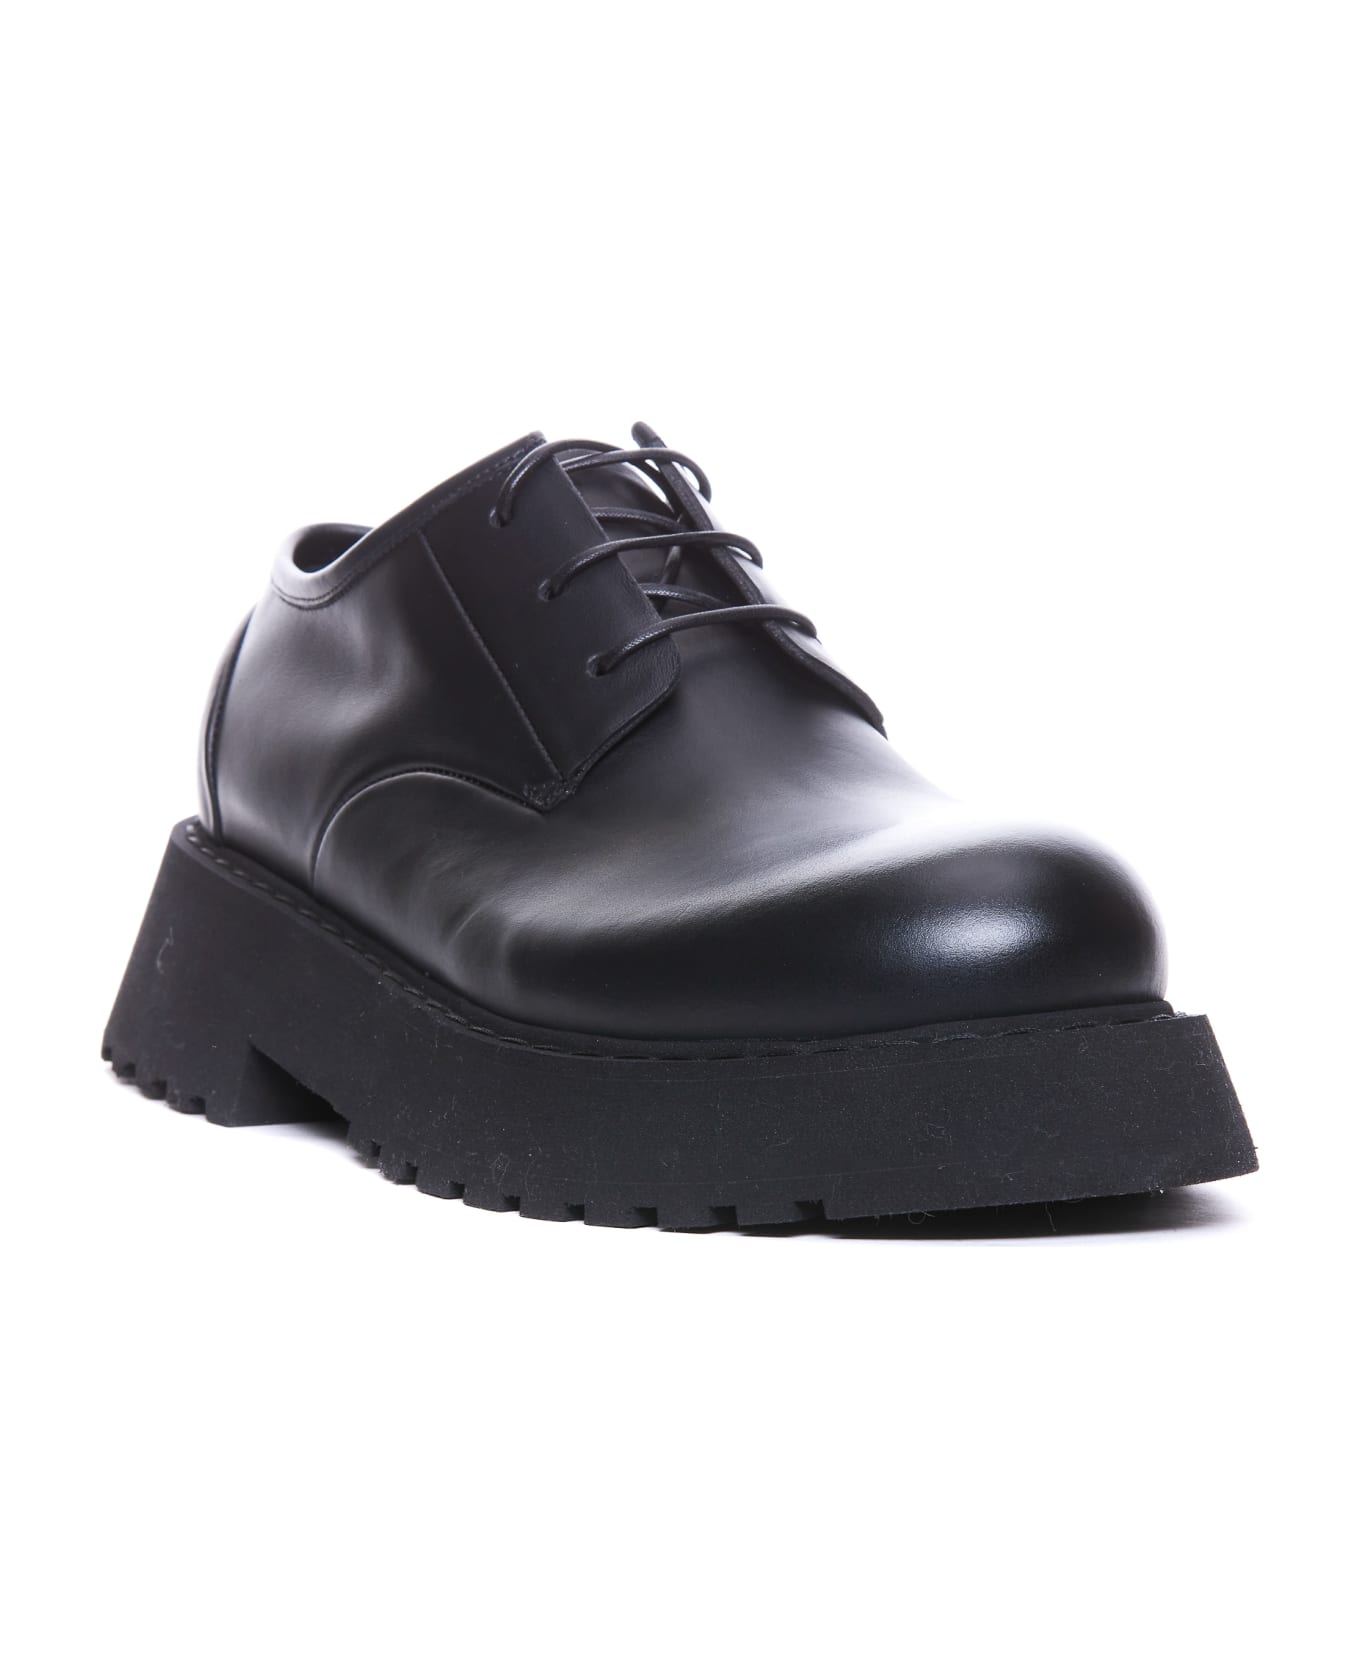 Marsell Micarro Derby Laced Up Shoes - Black